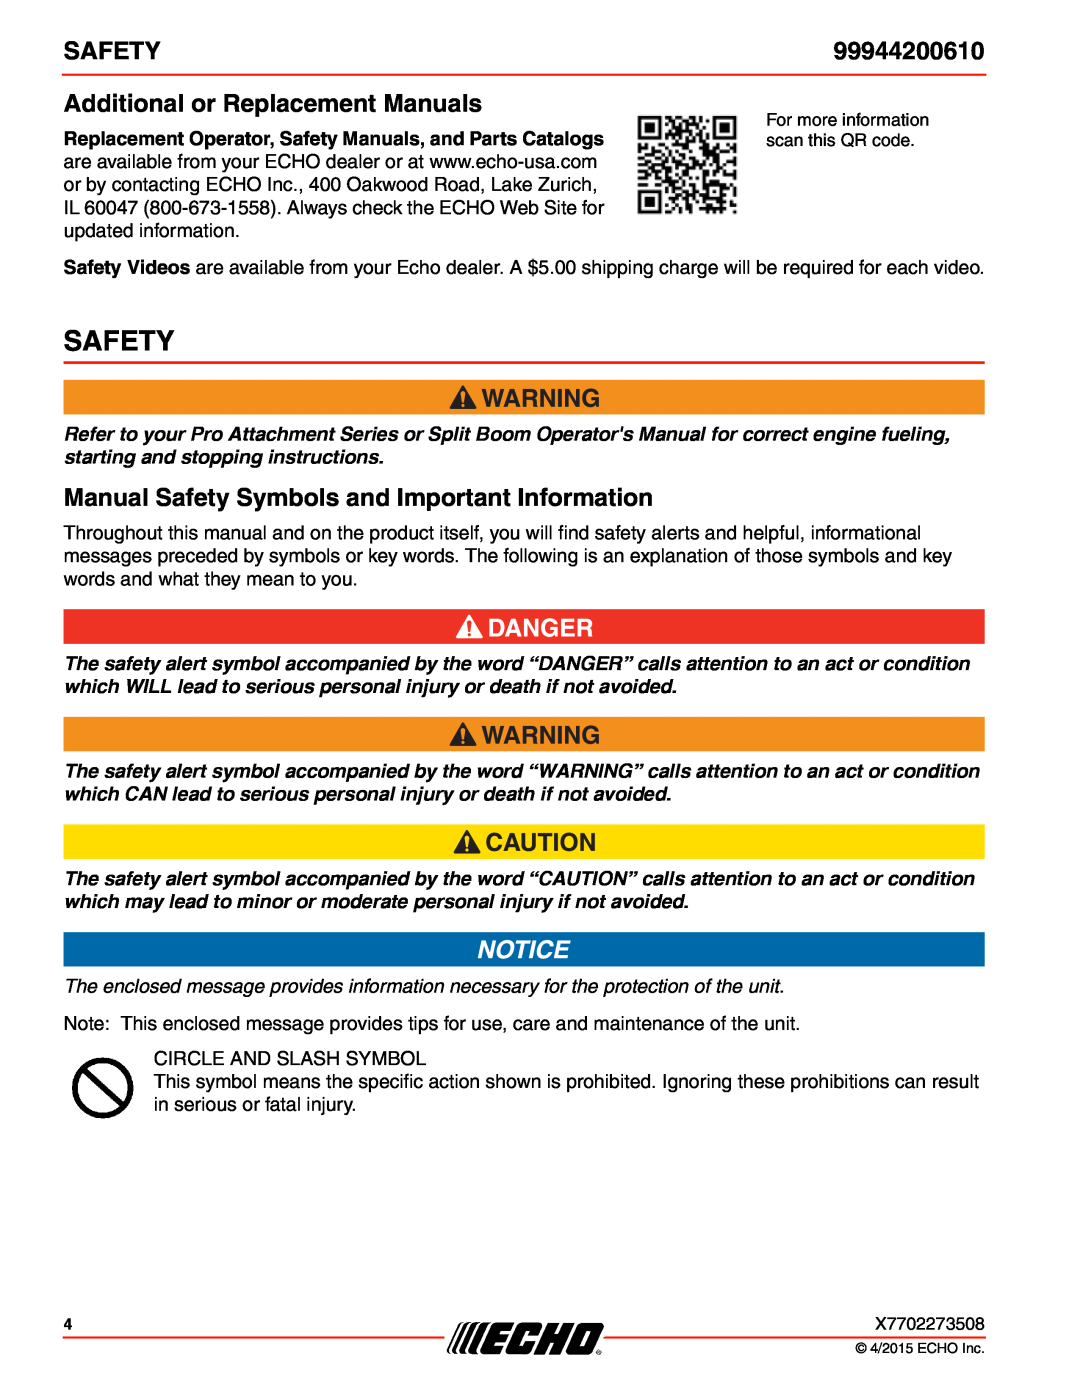 Echo 2400, 260, 261, 231 99944200610, Additional or Replacement Manuals, Manual Safety Symbols and Important Information 